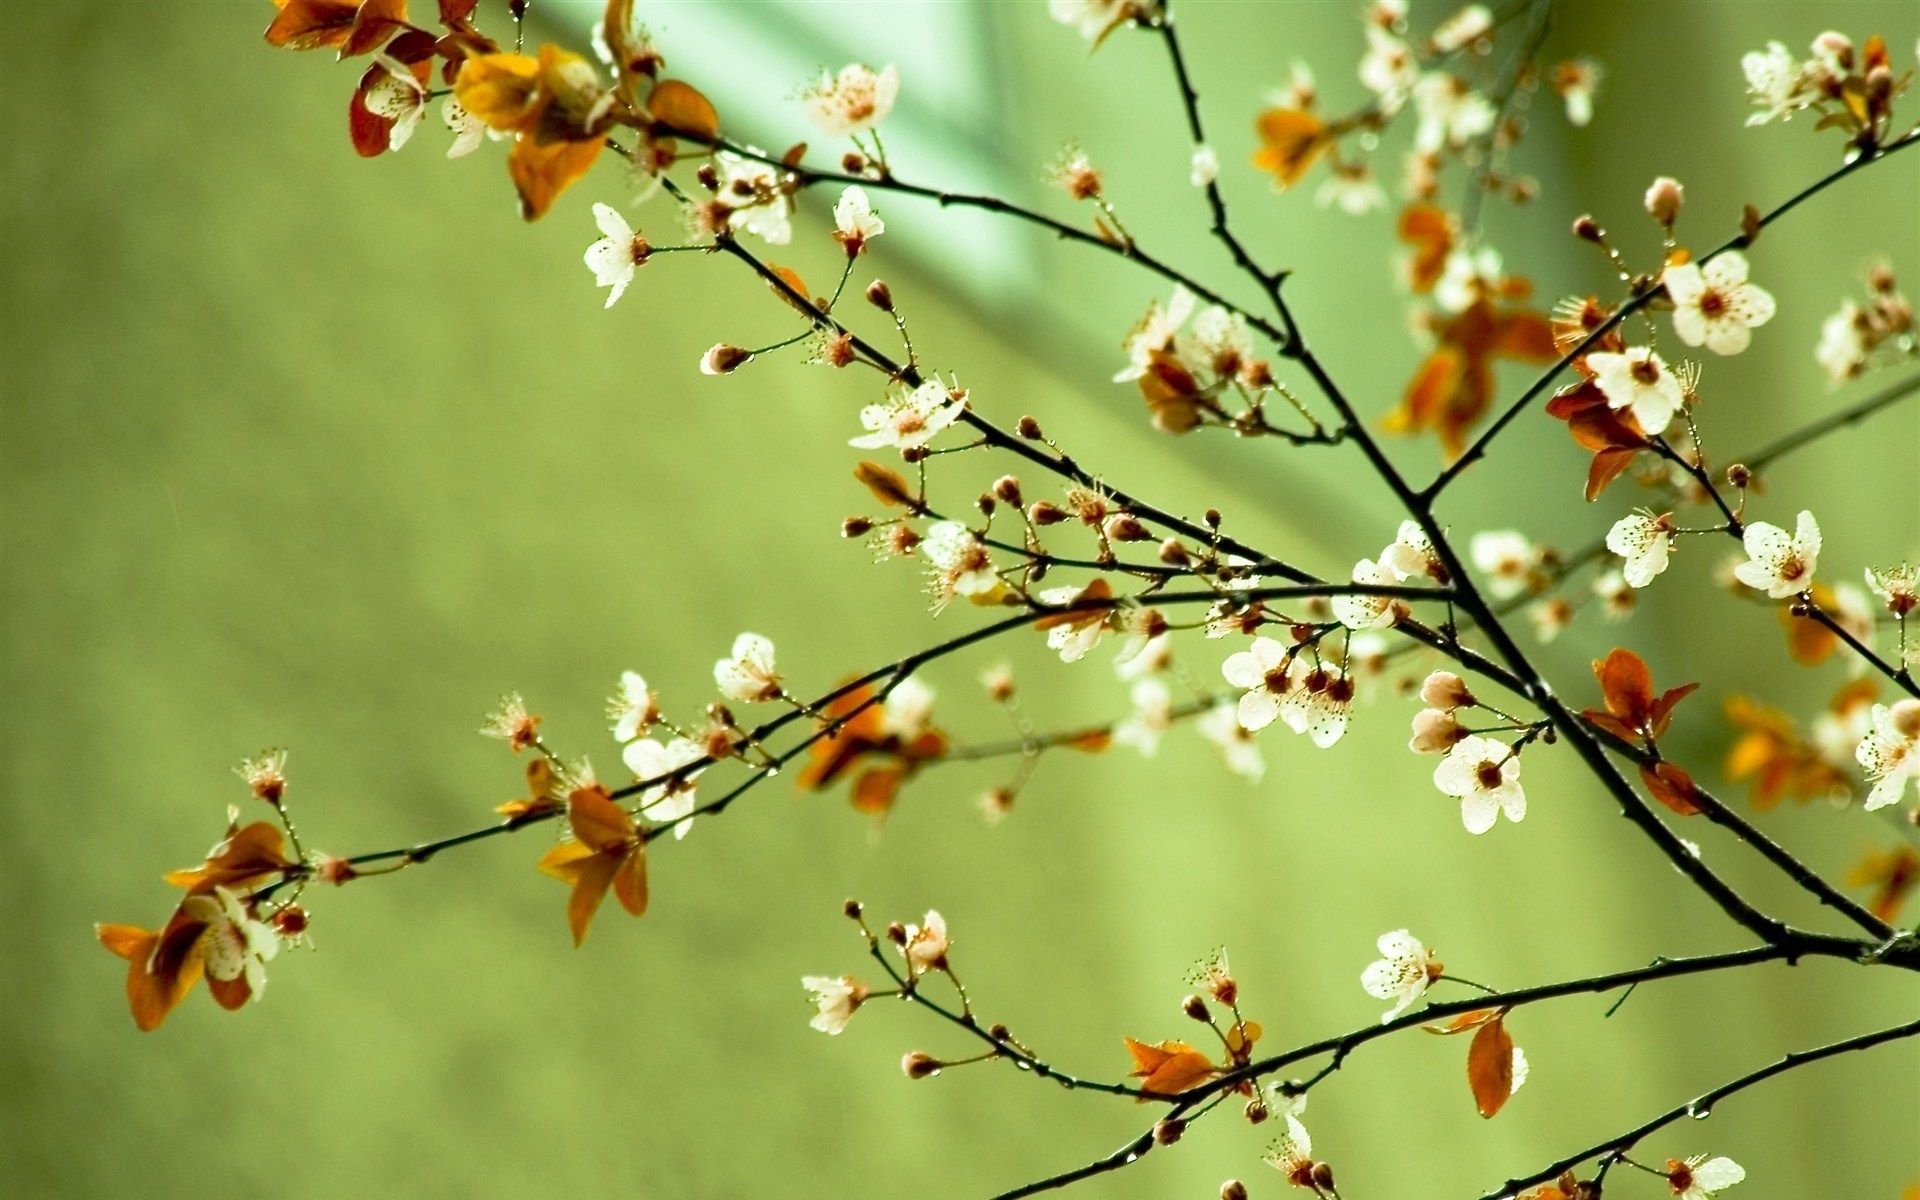 Spring Flowers HD Images Wallpapers 7545 - HD Wallpapers Site